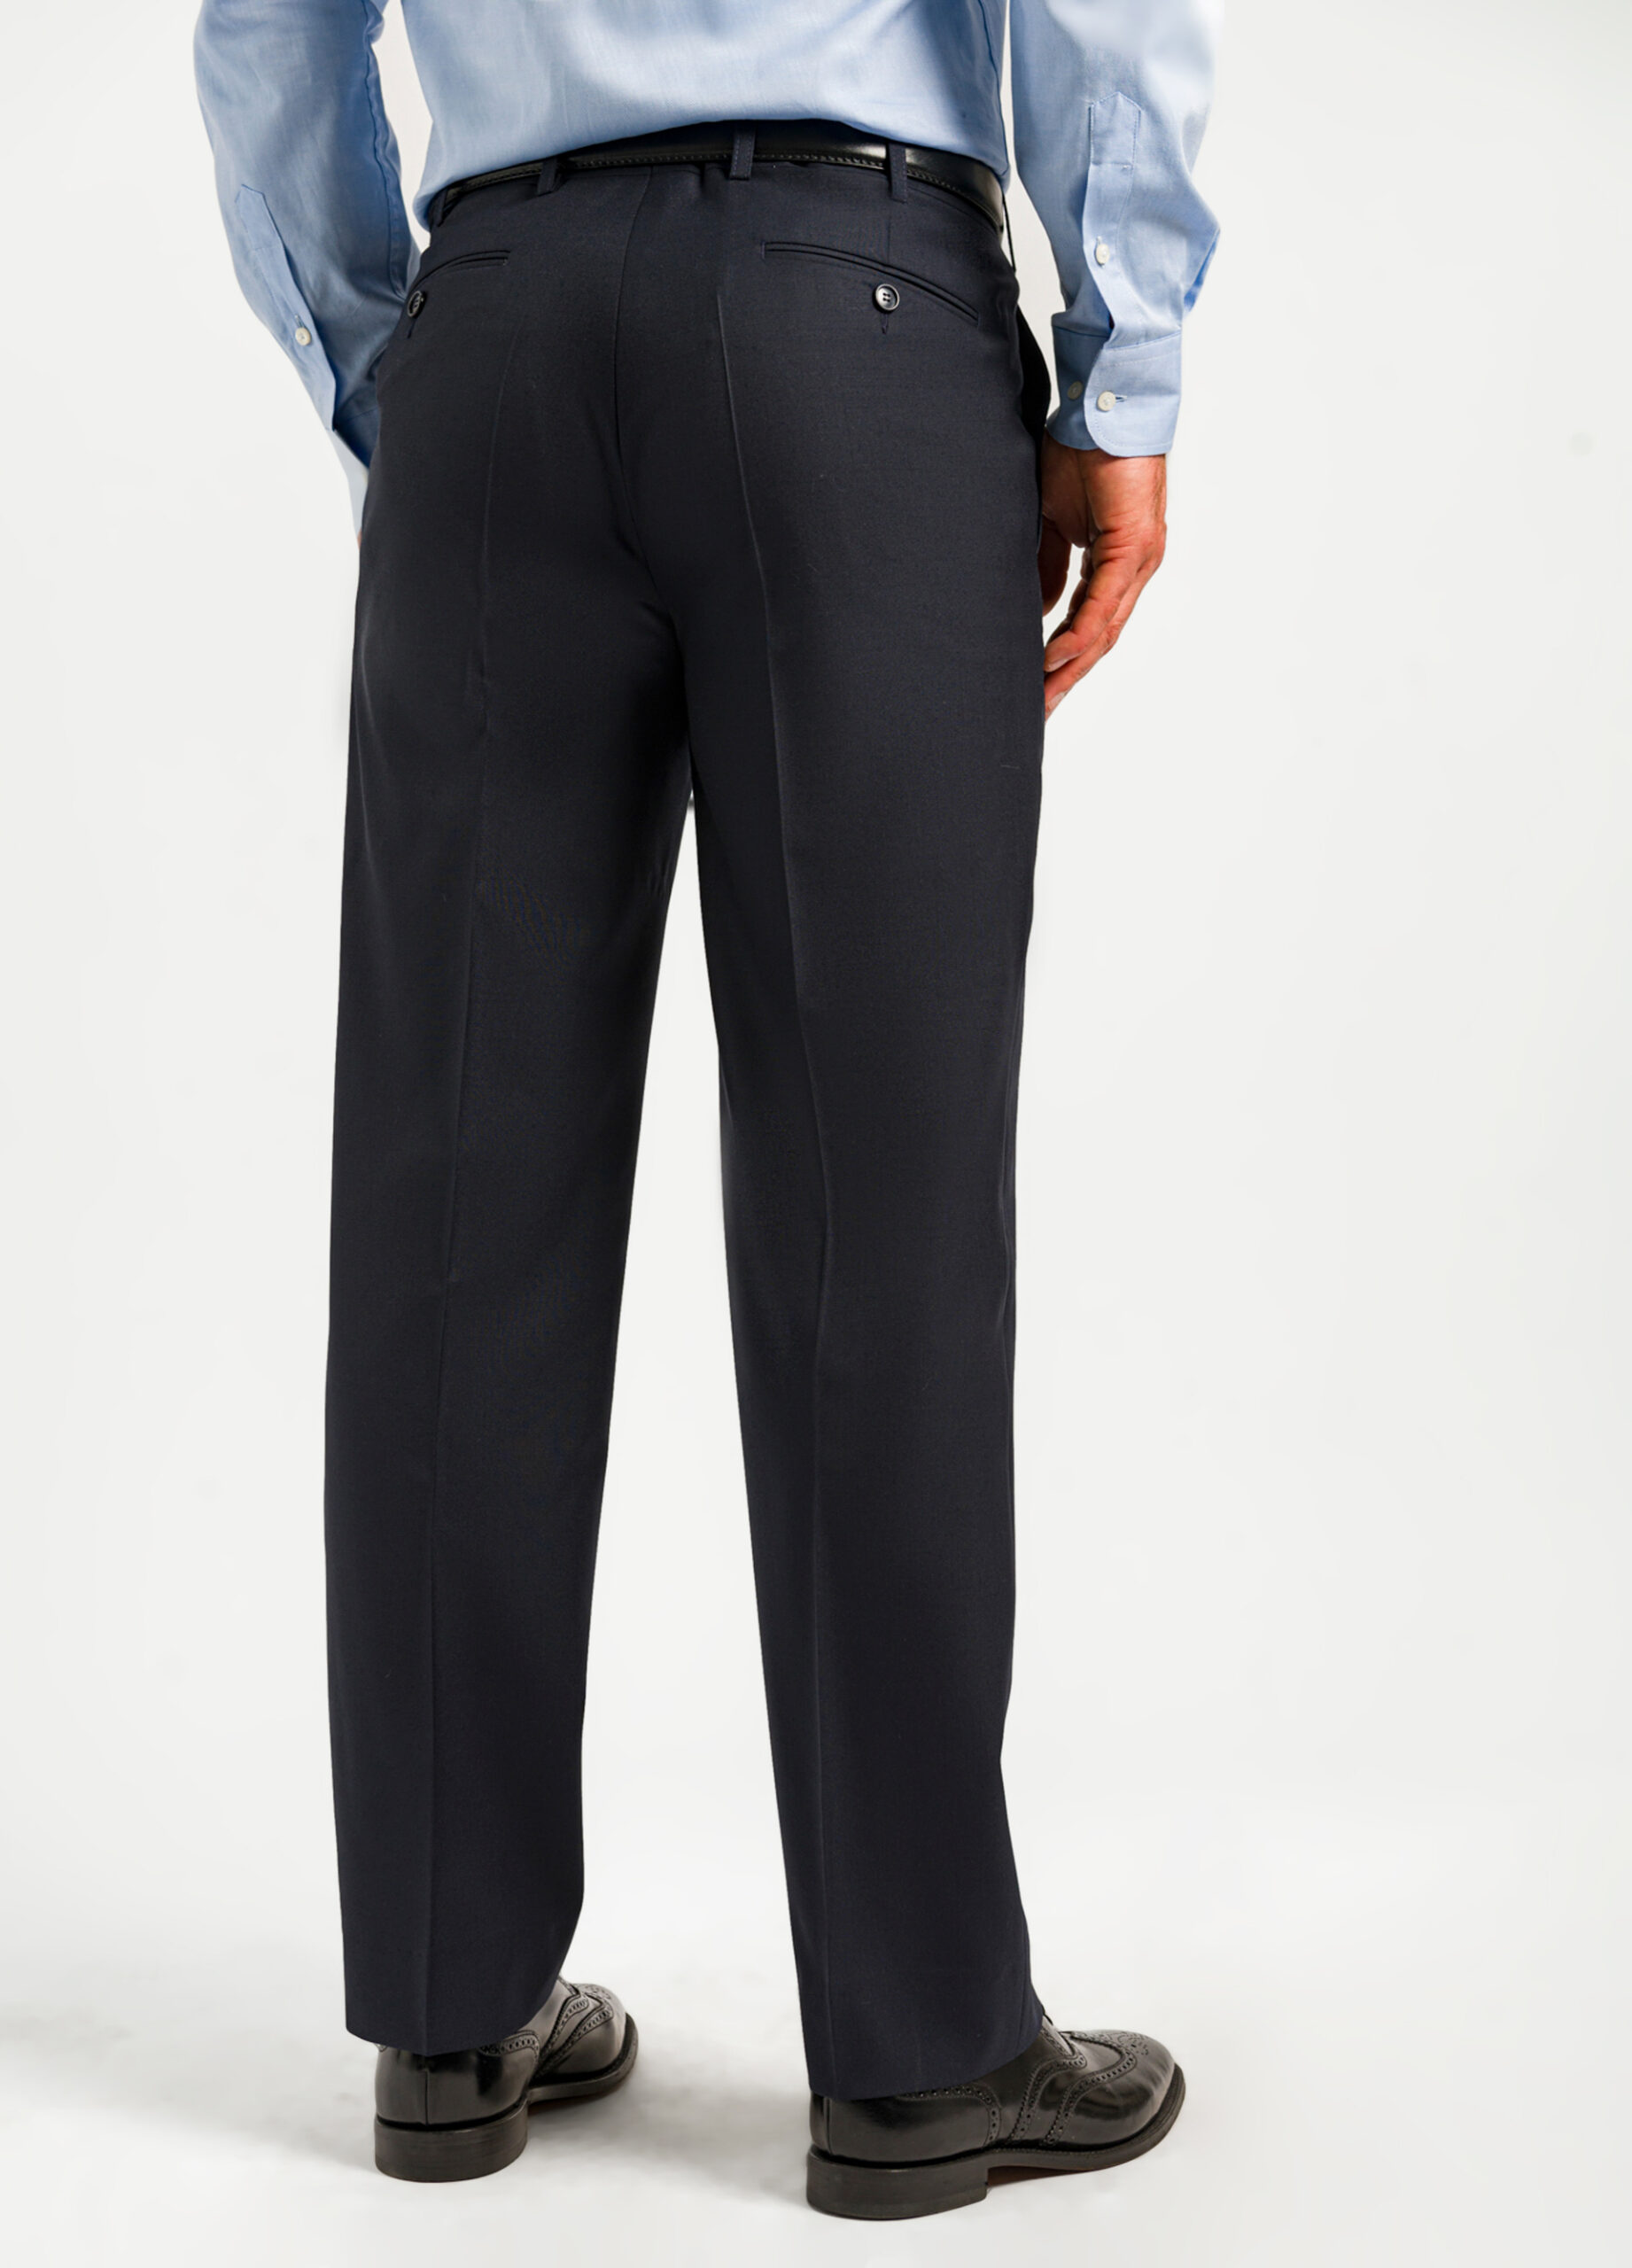 Navy formal light weight trousers seat